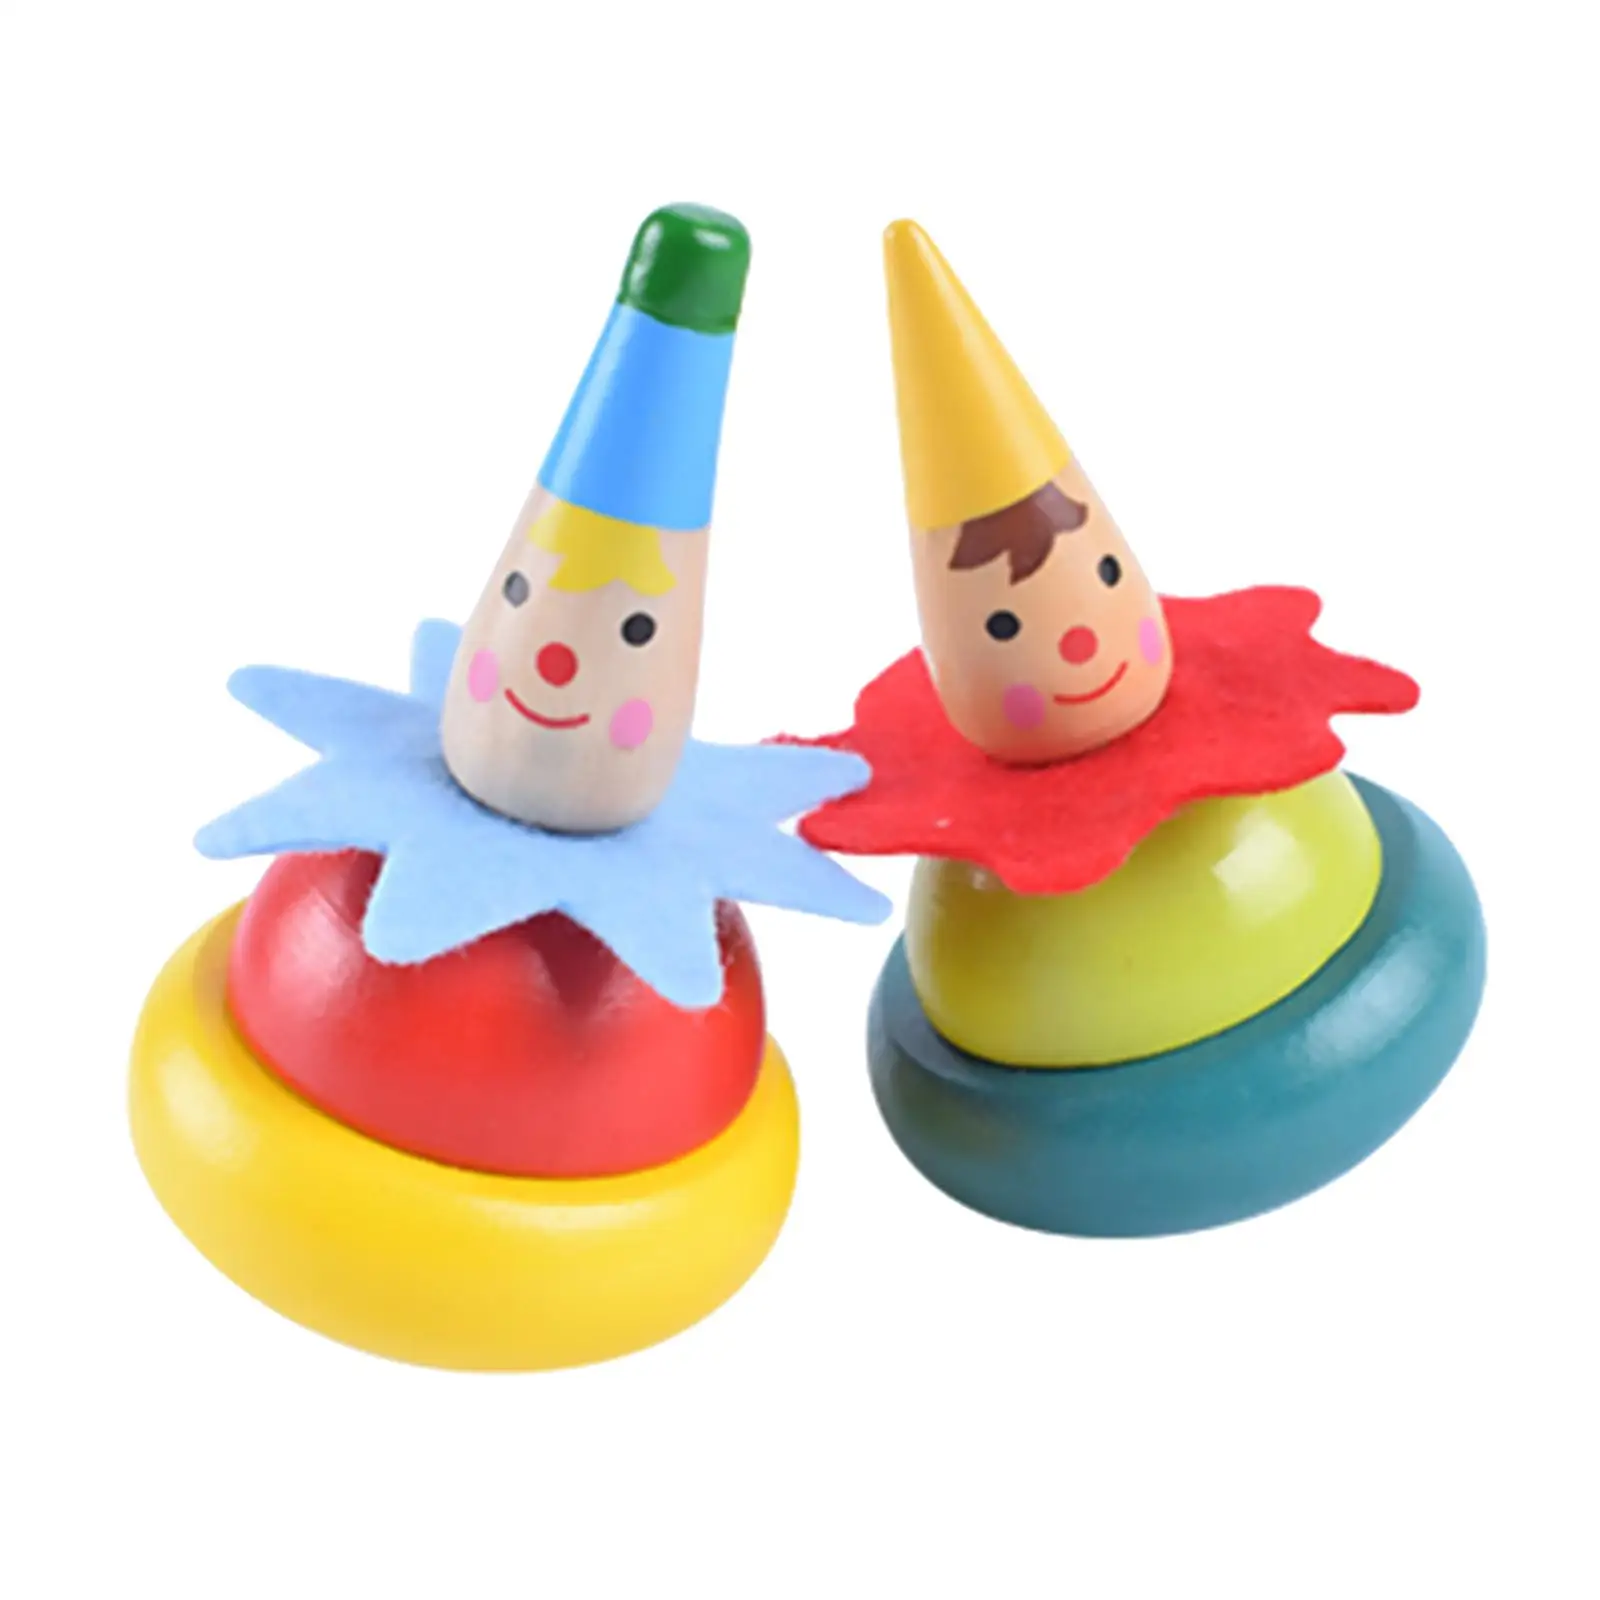 Wooden Whirling Toy Preschool Game Clown Gyro Toy Battling Tops for Children